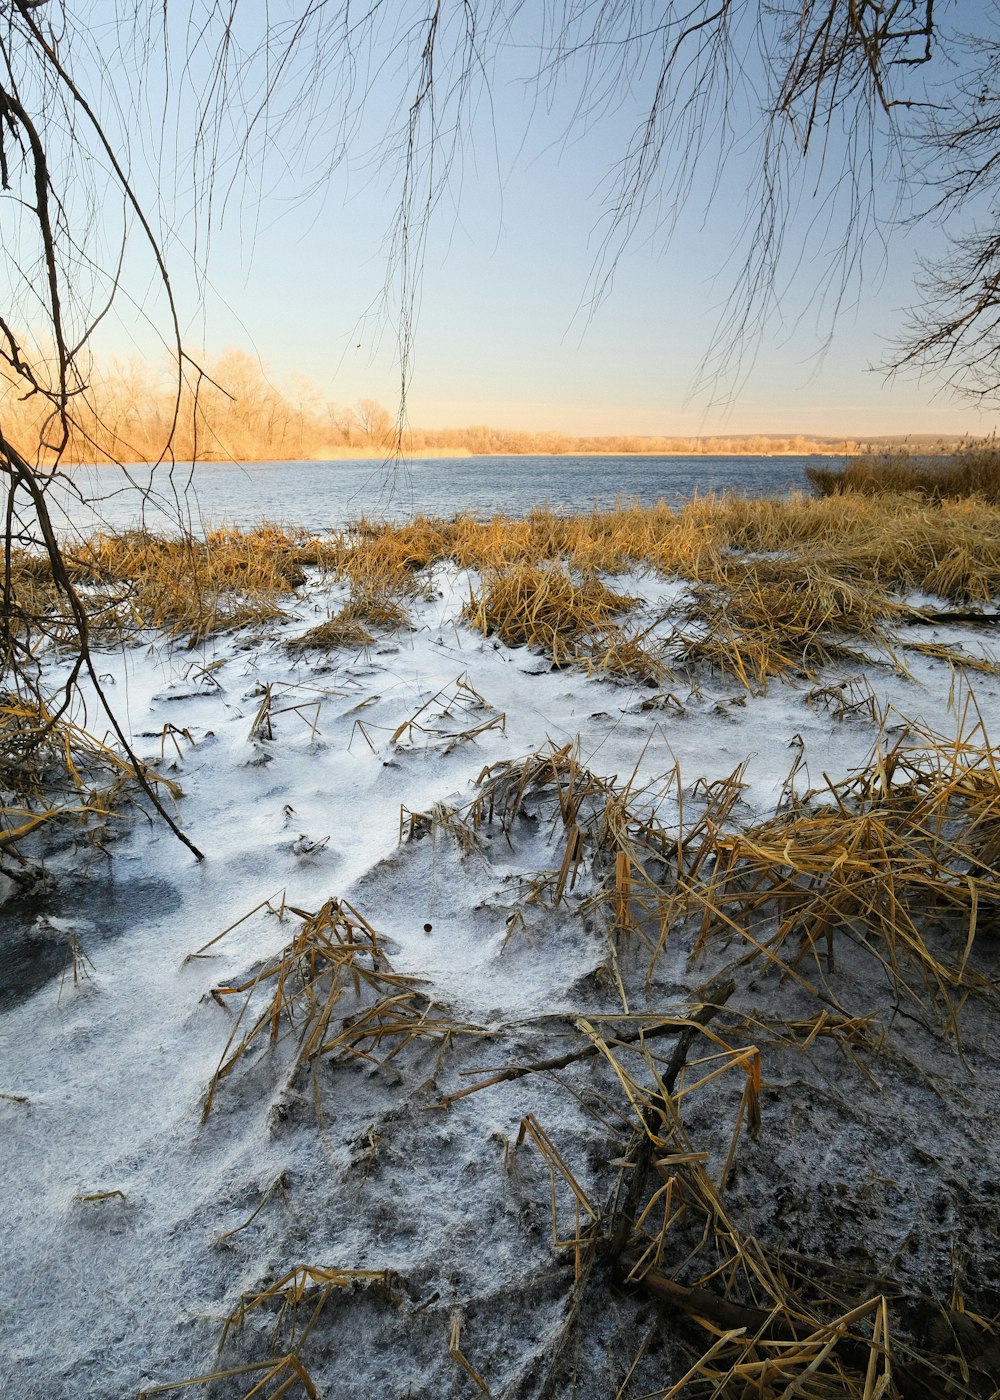 a snowy field with trees and water in the background